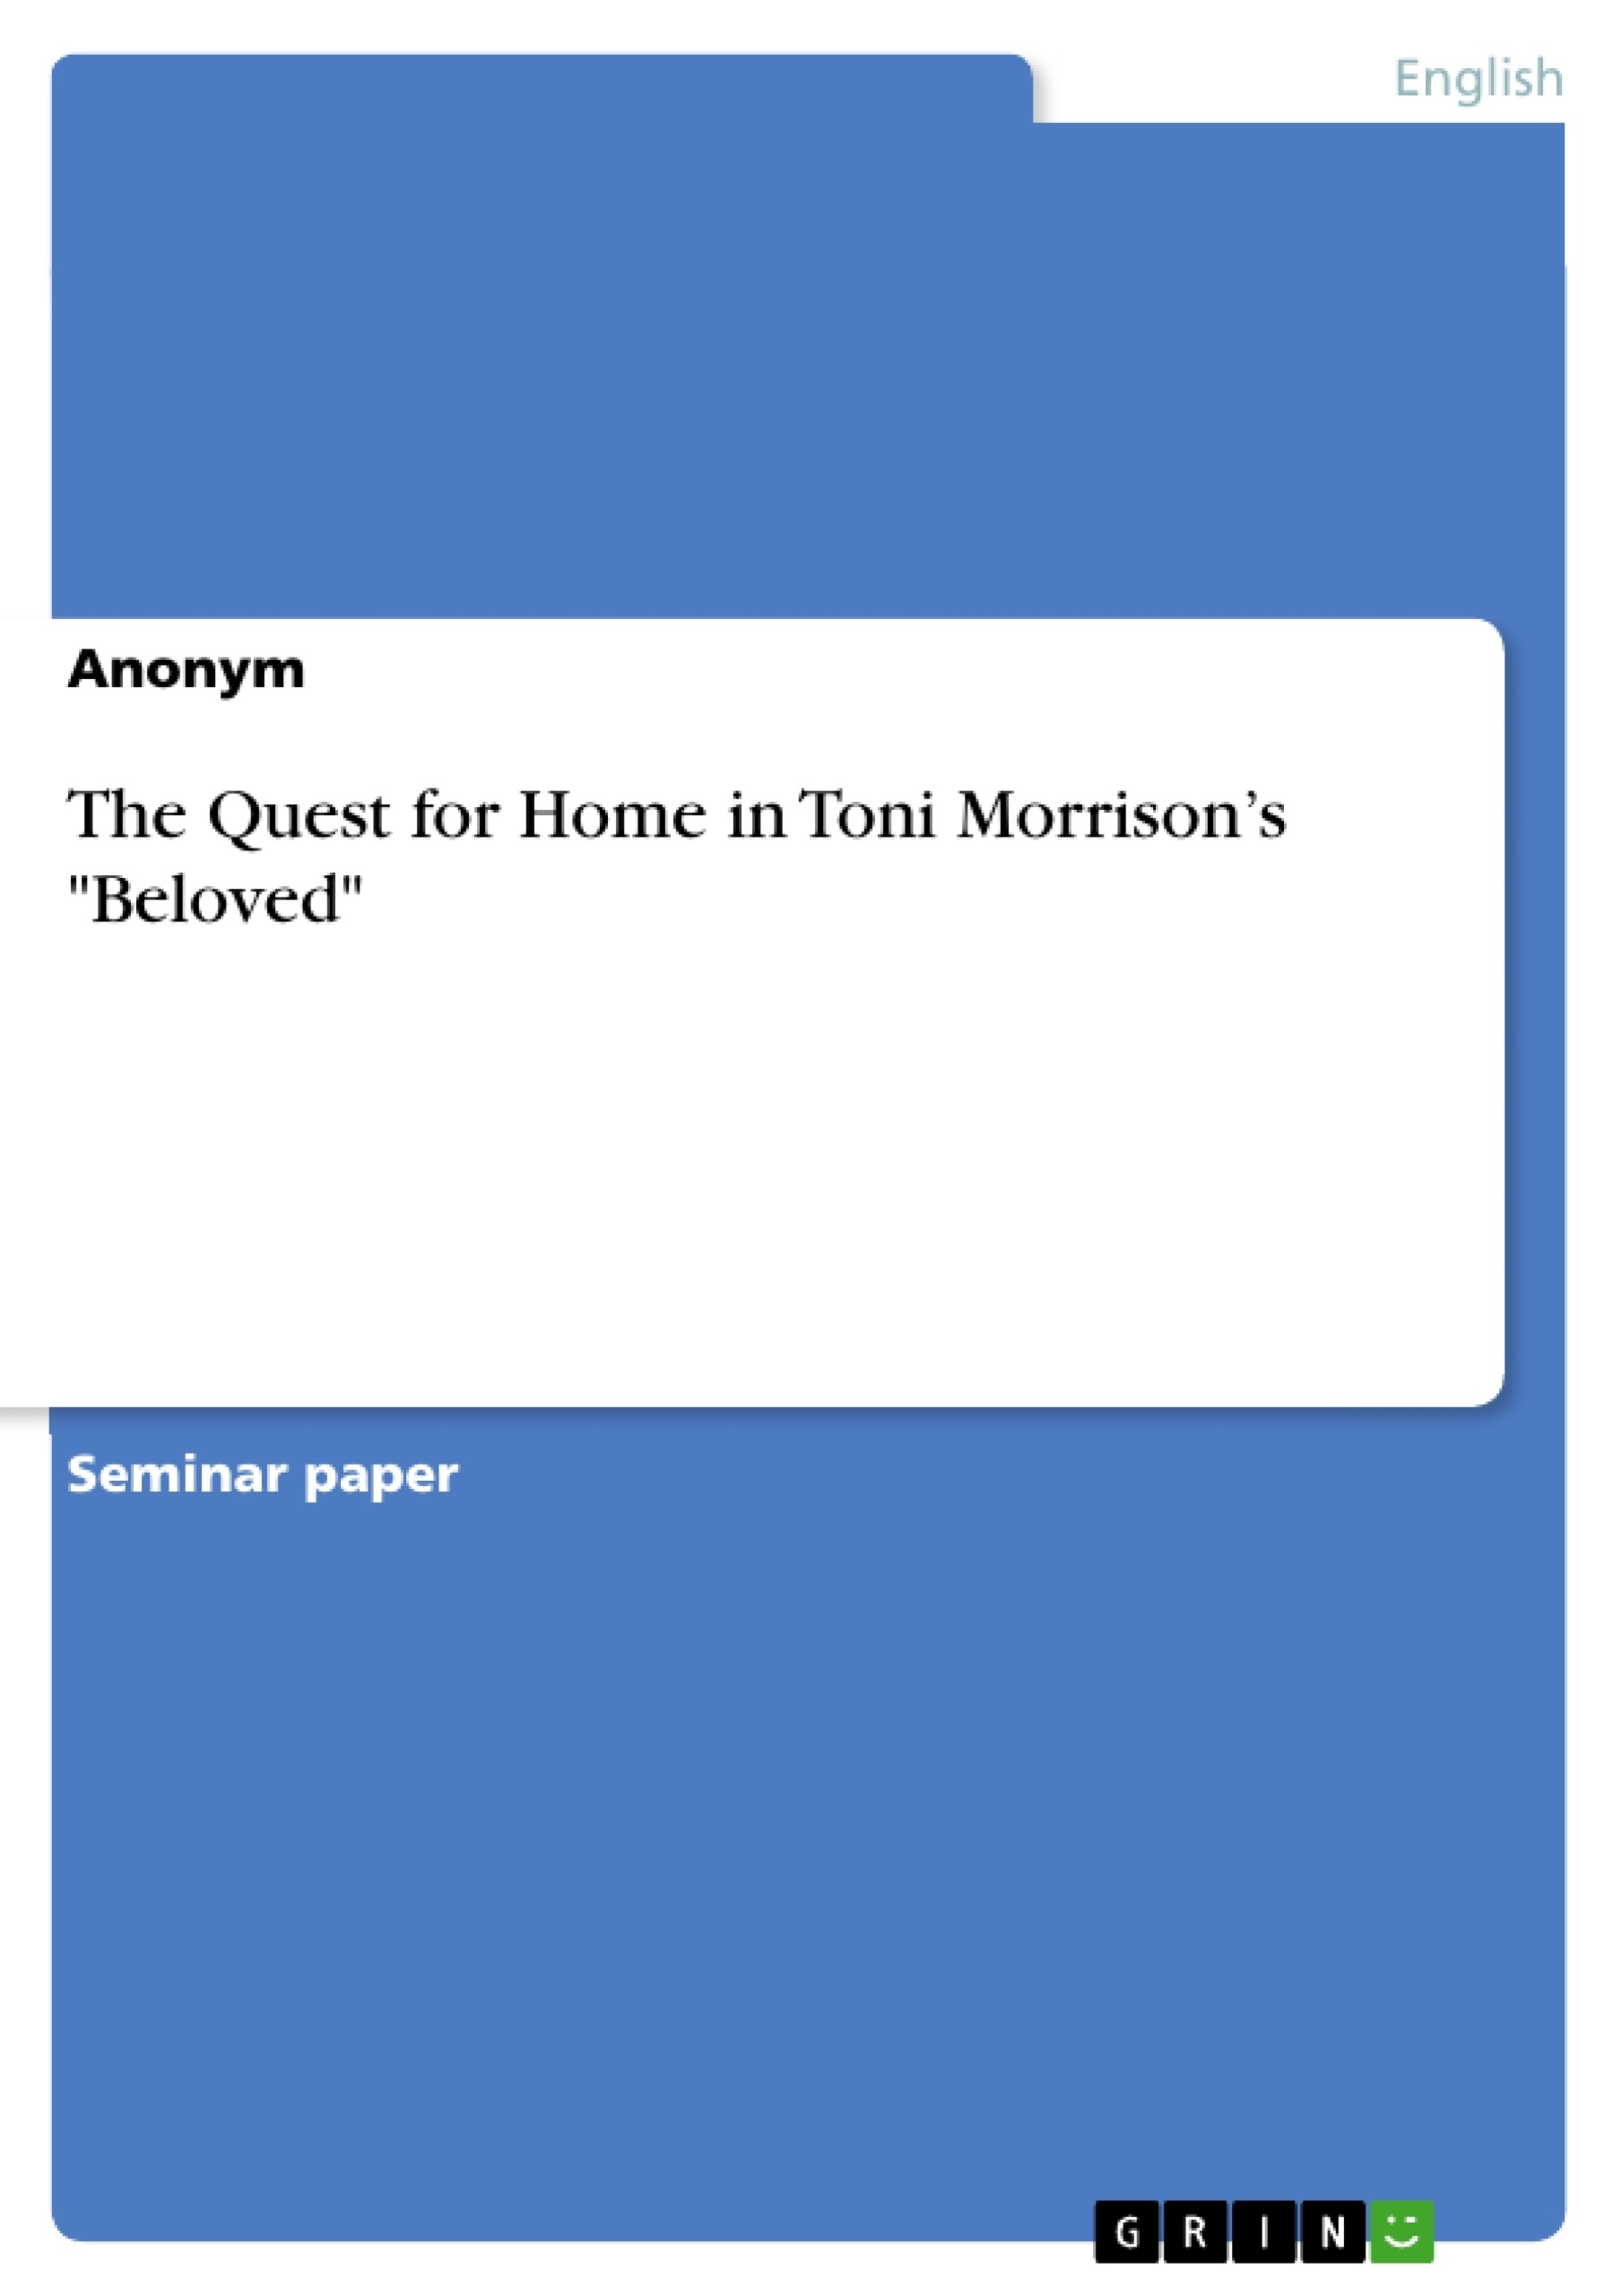 Titre: The Quest for Home in Toni Morrison’s "Beloved"